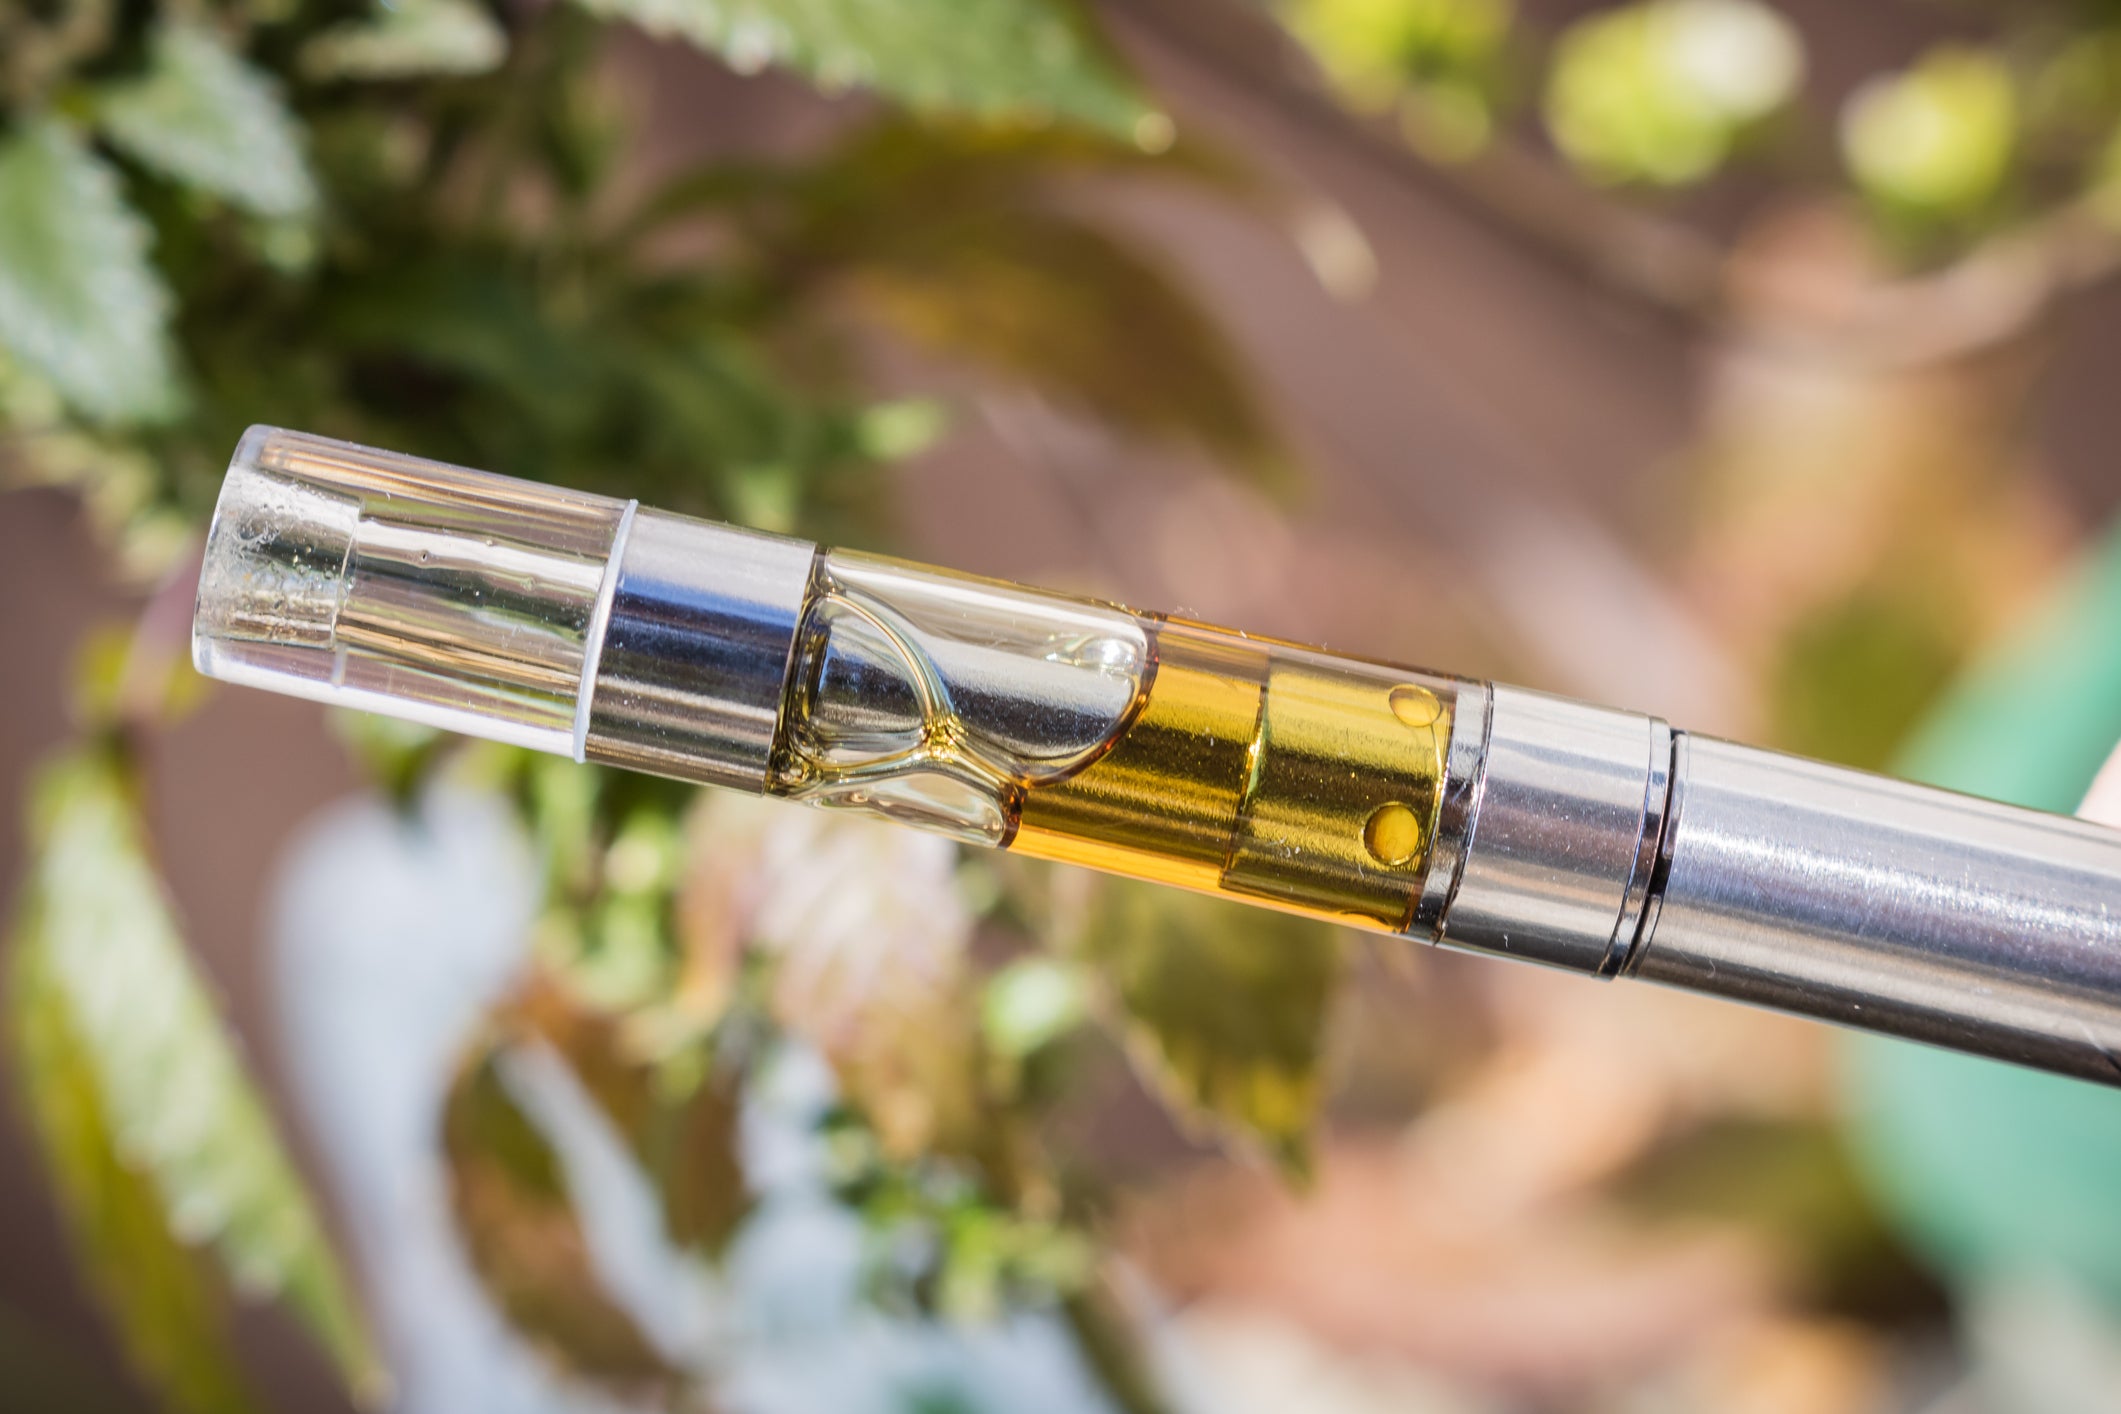 Explained: What is a Dab Pen?